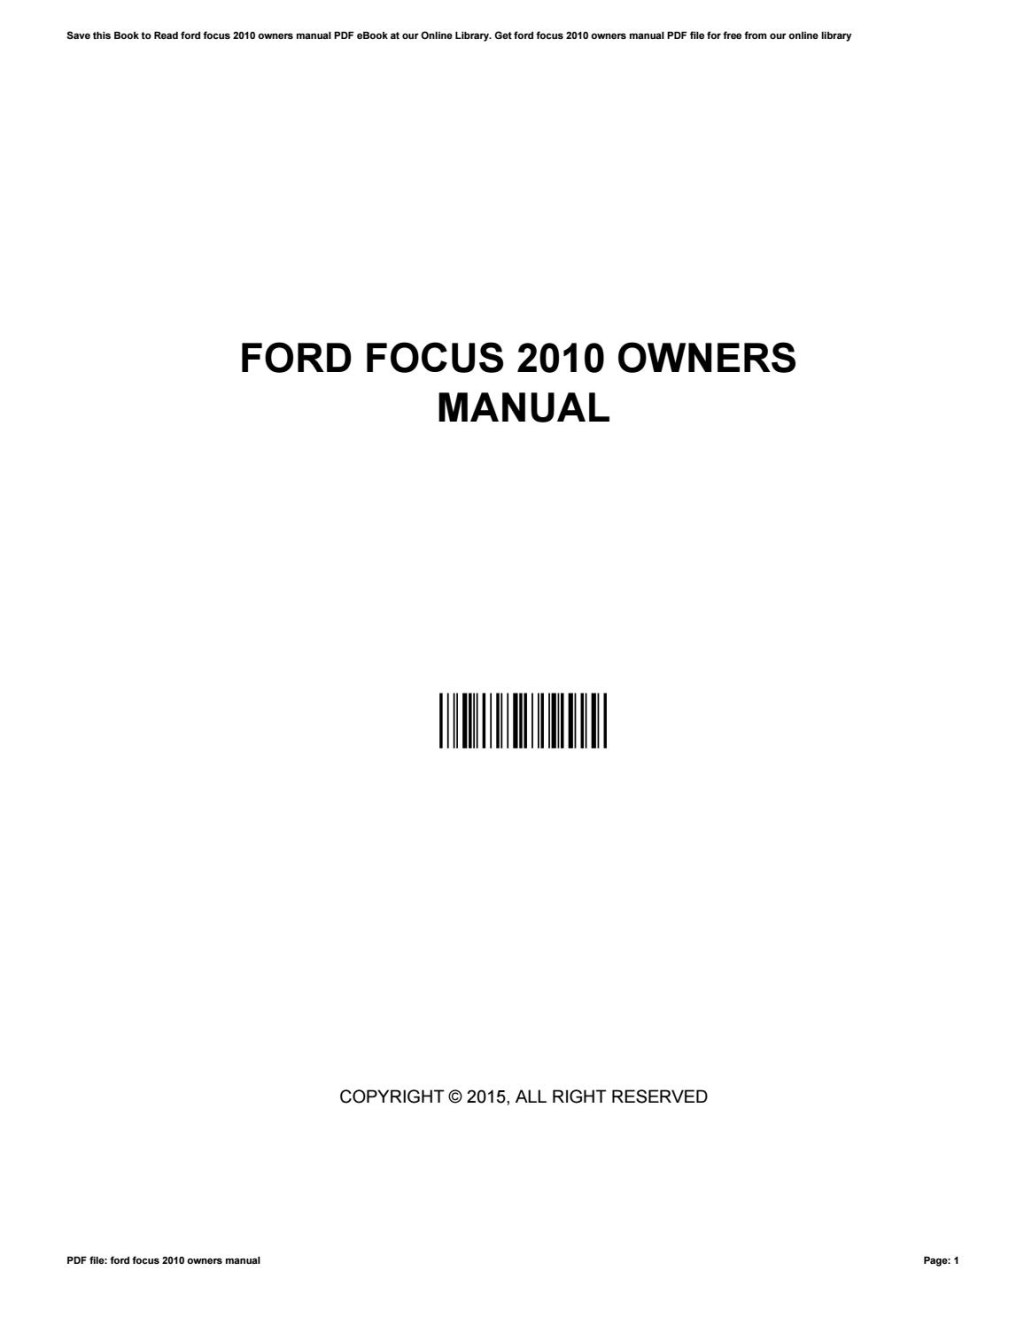 Picture of: Ford focus  owners manual by apssdc – Issuu